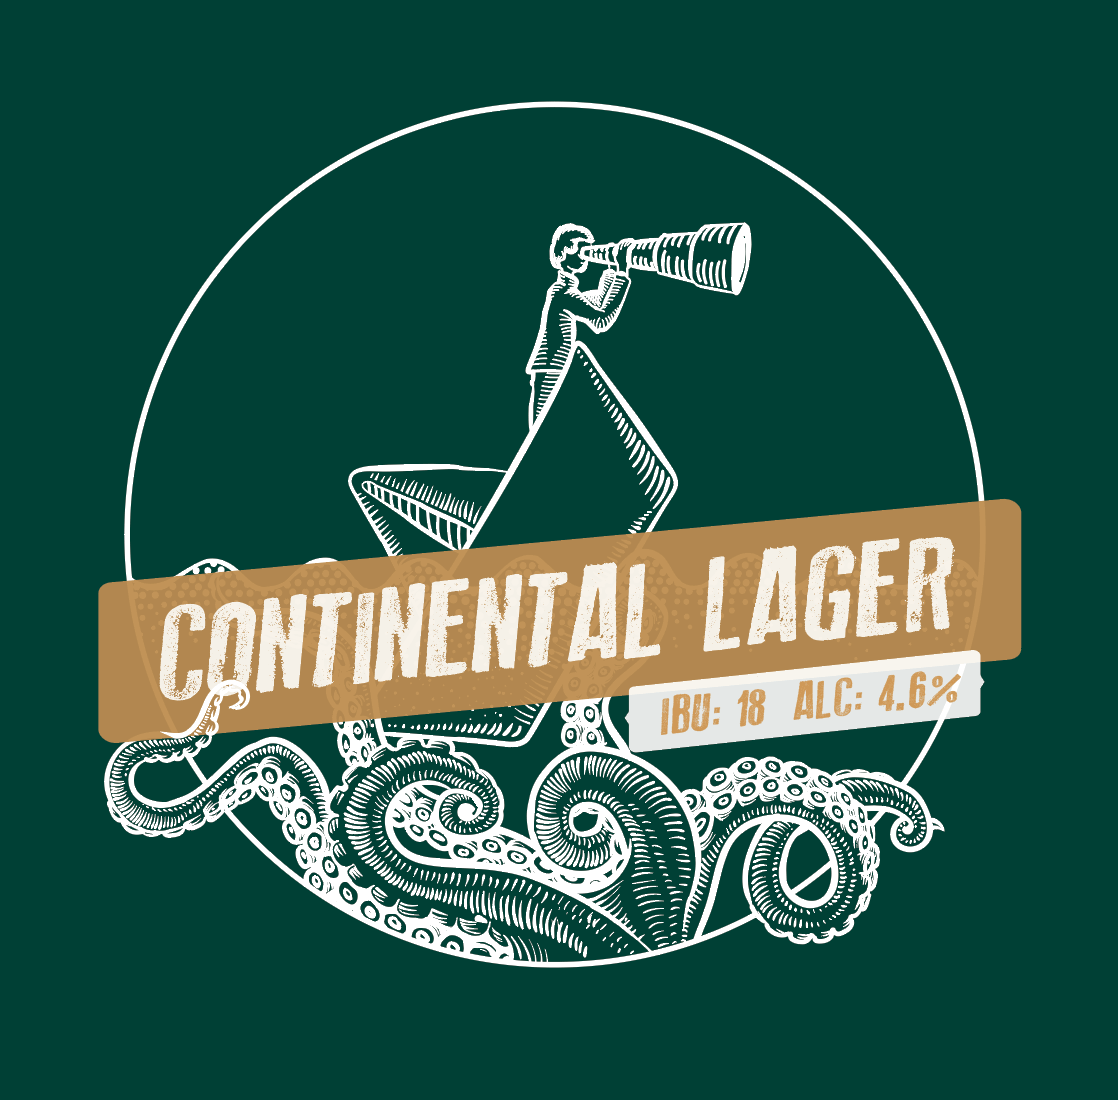 CONTINENTAL LAGER